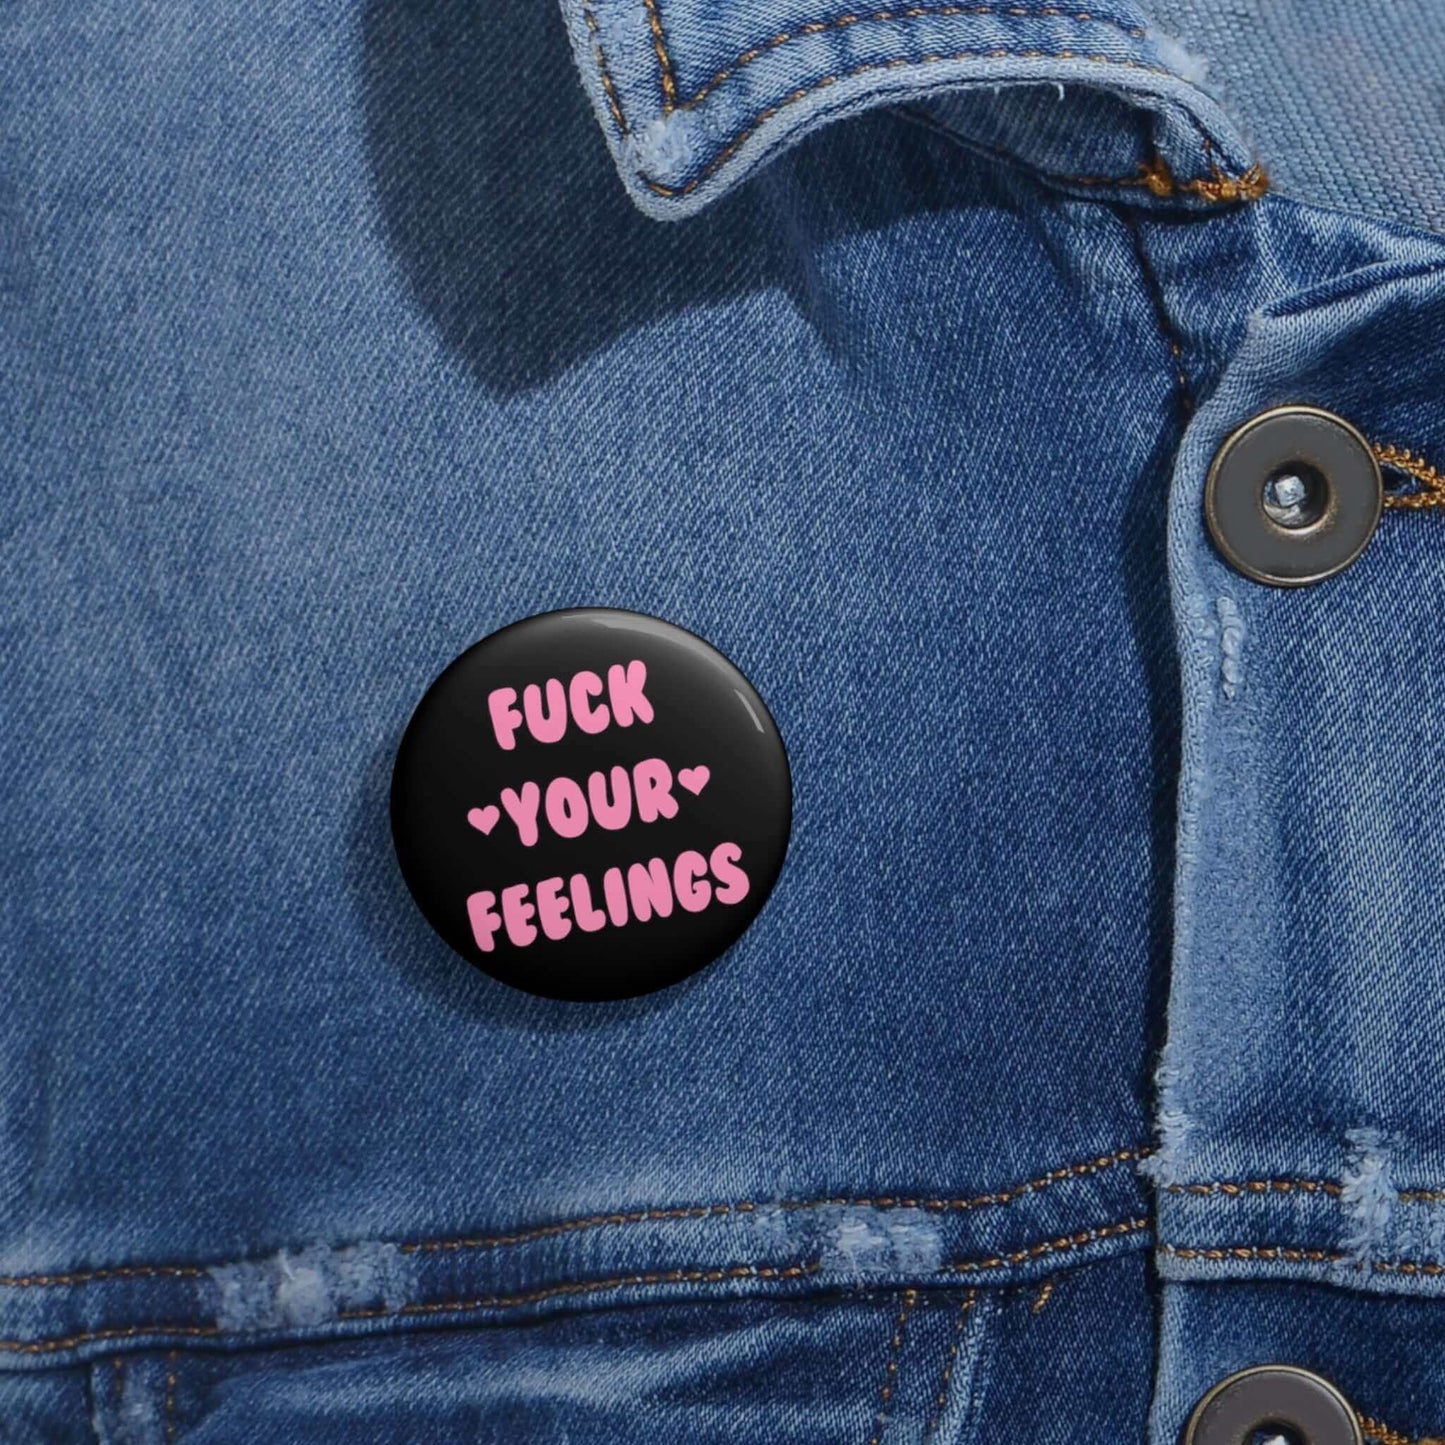 Fuck your feelings pin-back button